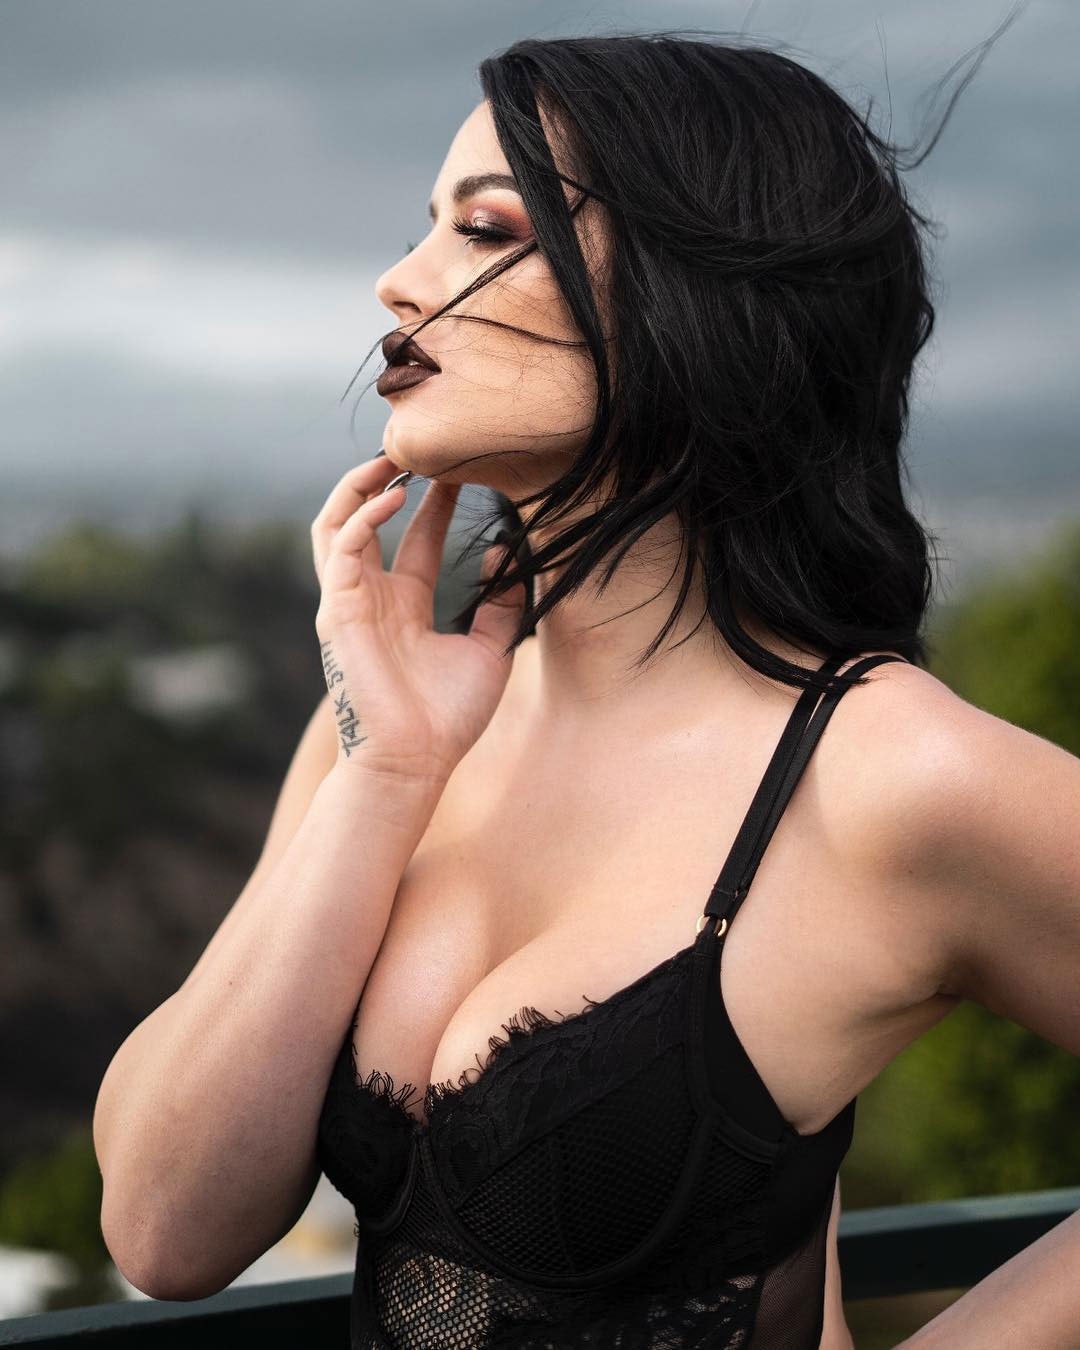 WWE Wrestler Turned Actor Paige Shows Off Her Wild Side In Hot And Sexy